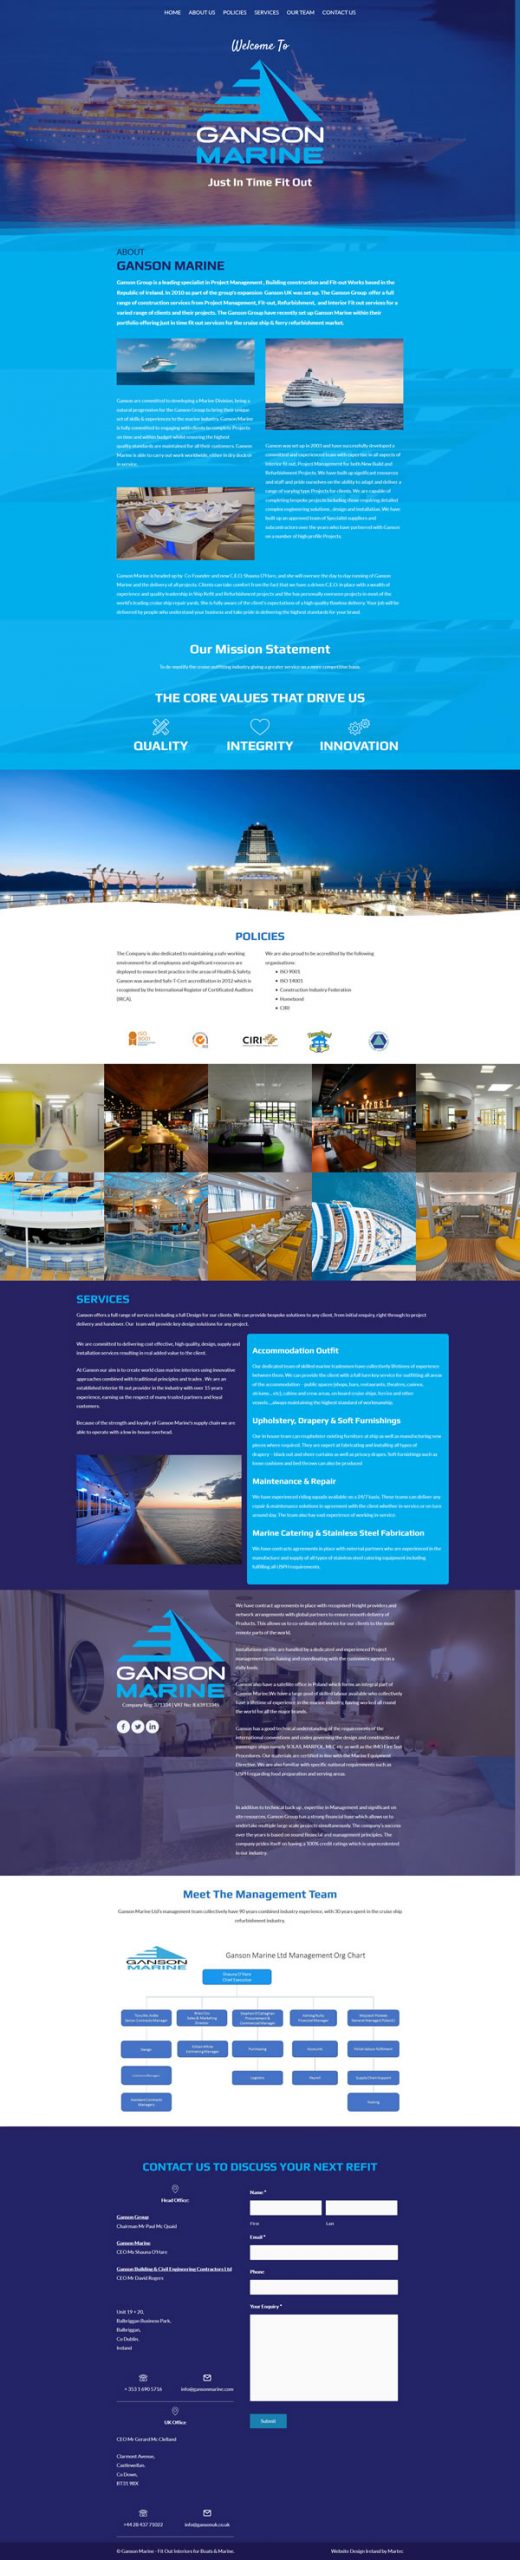 Ganson Marine – Fit Out Interiors for Boats & Marine